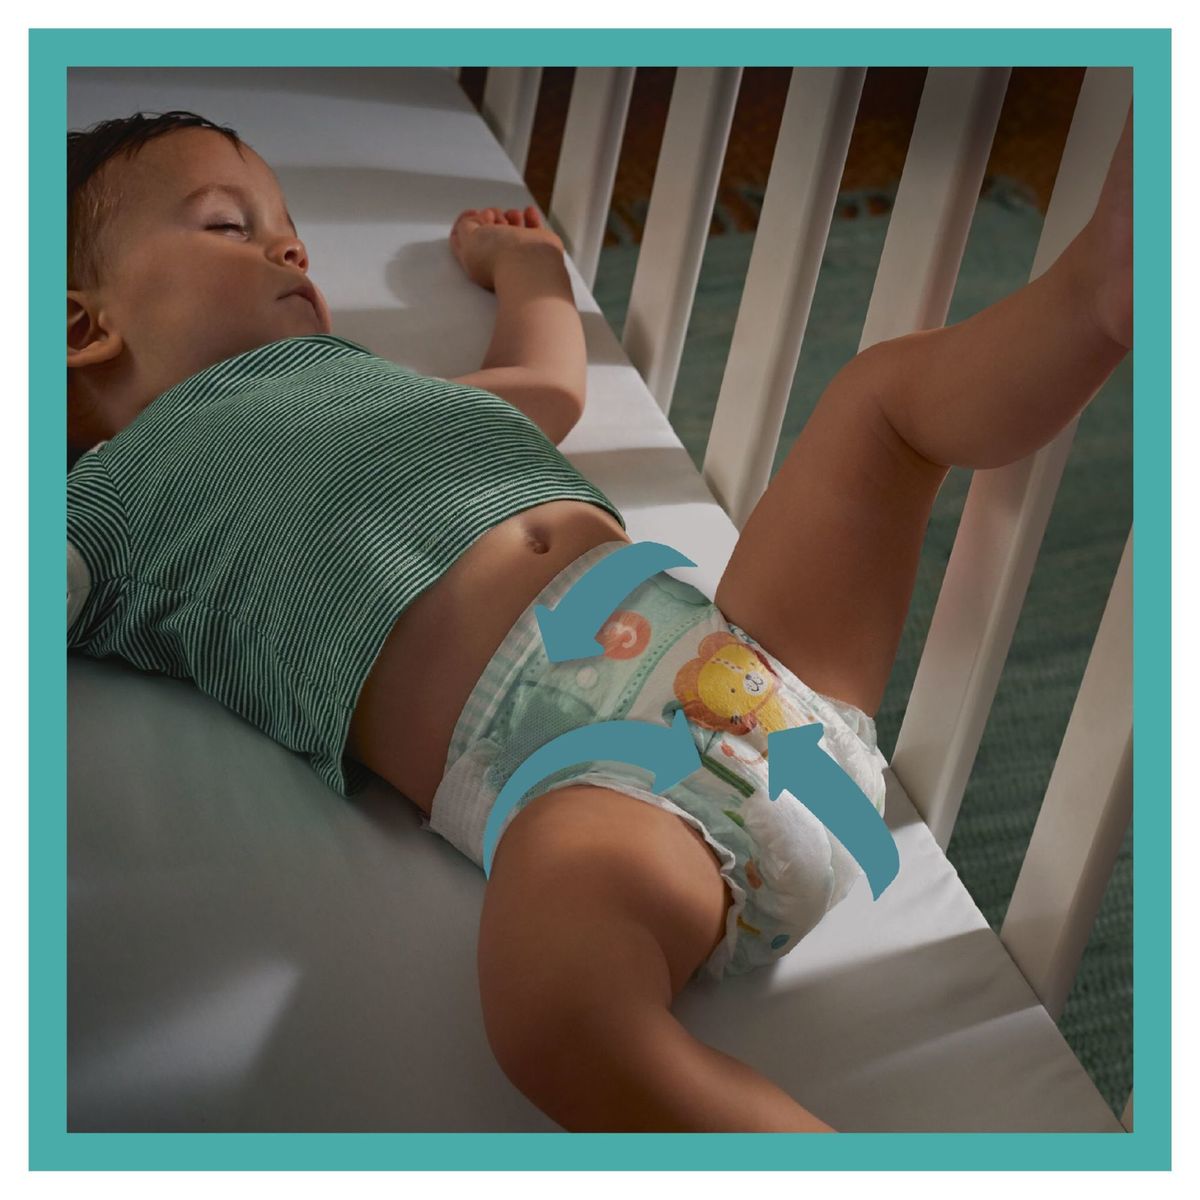 Pampers Baby-Dry Taille 7, 18 Langes 15kg+